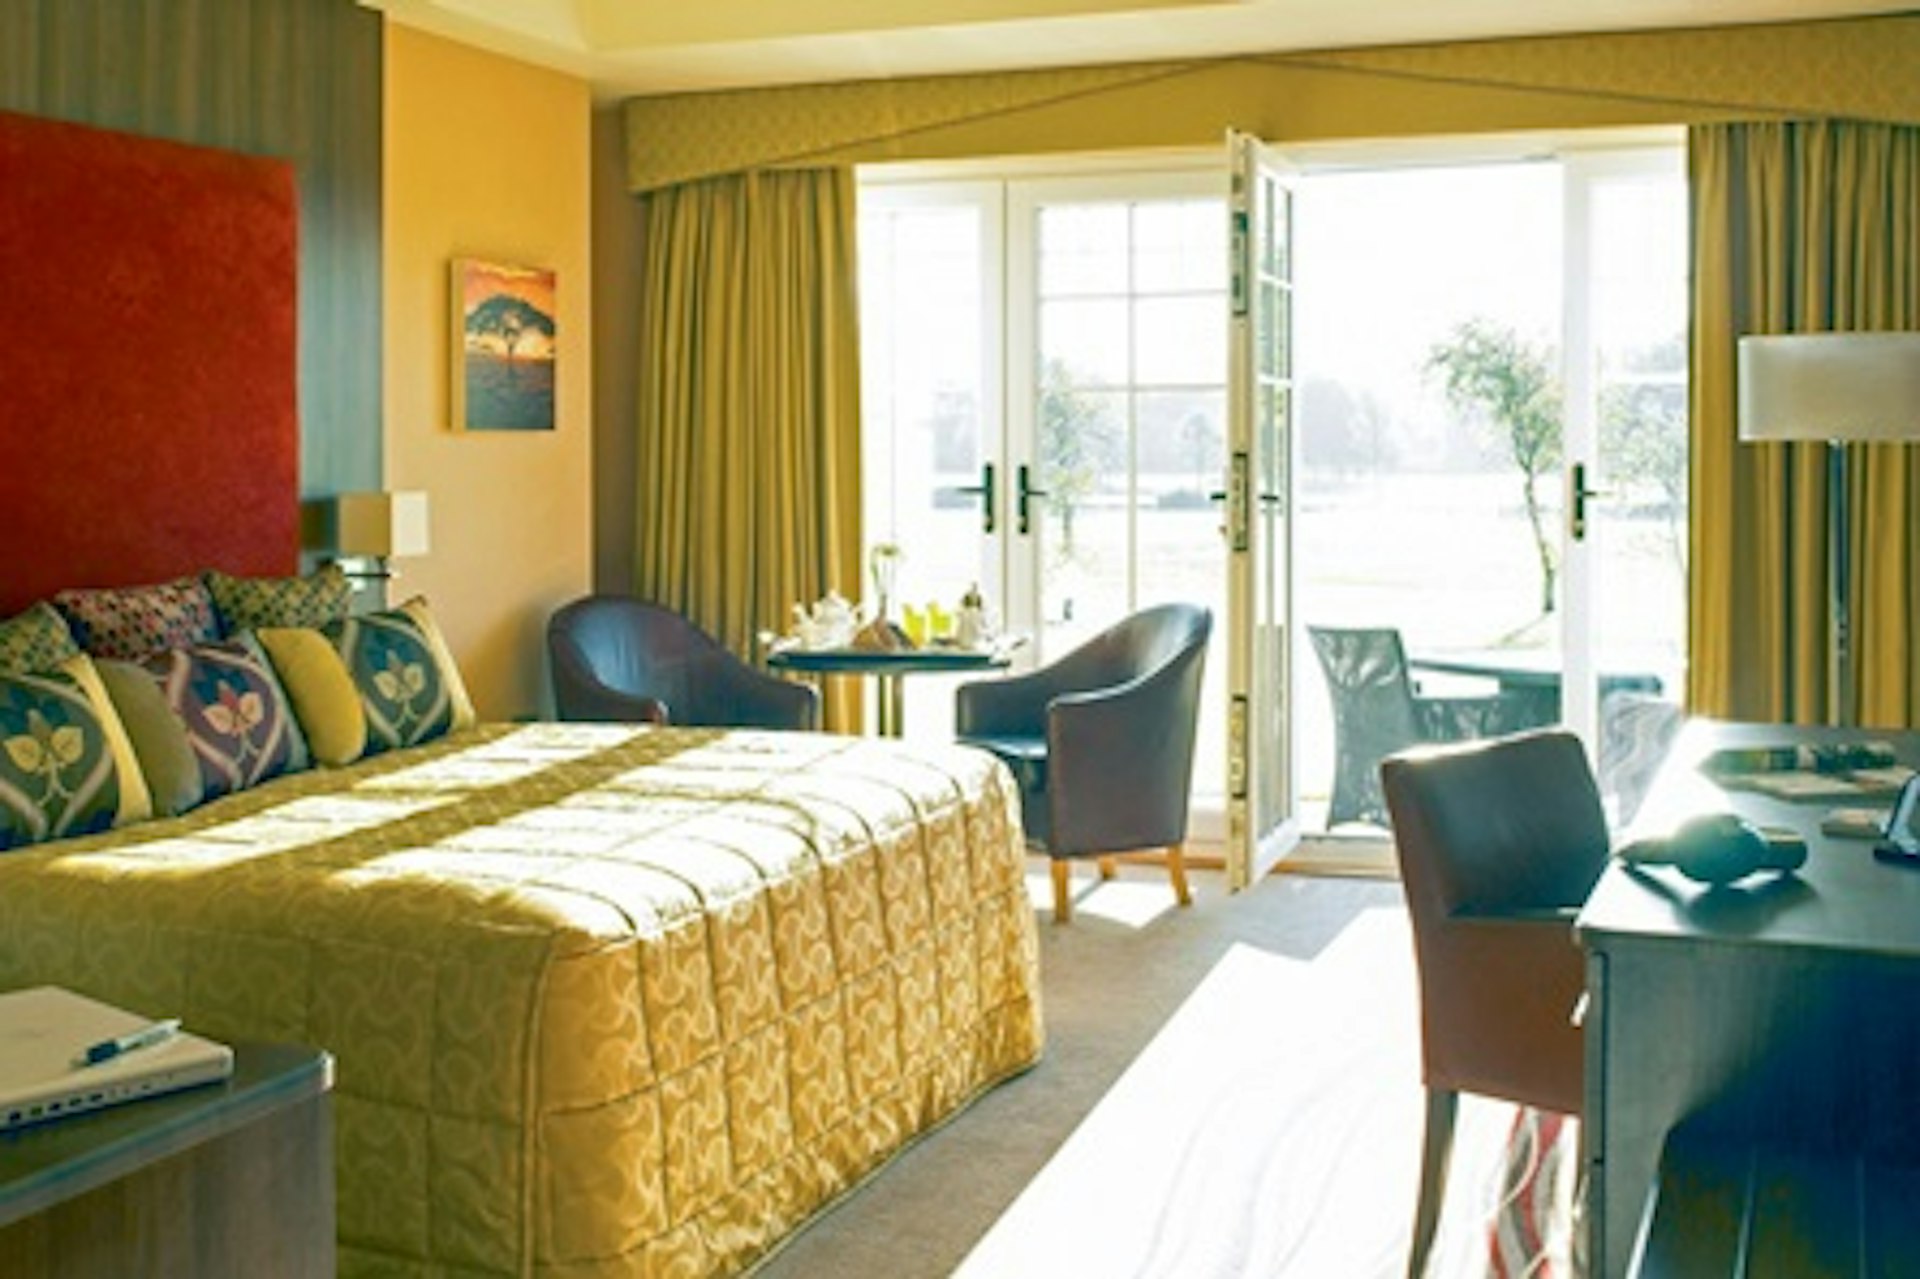 One Night Break for Two at Formby Hall Golf Resort and Spa 2